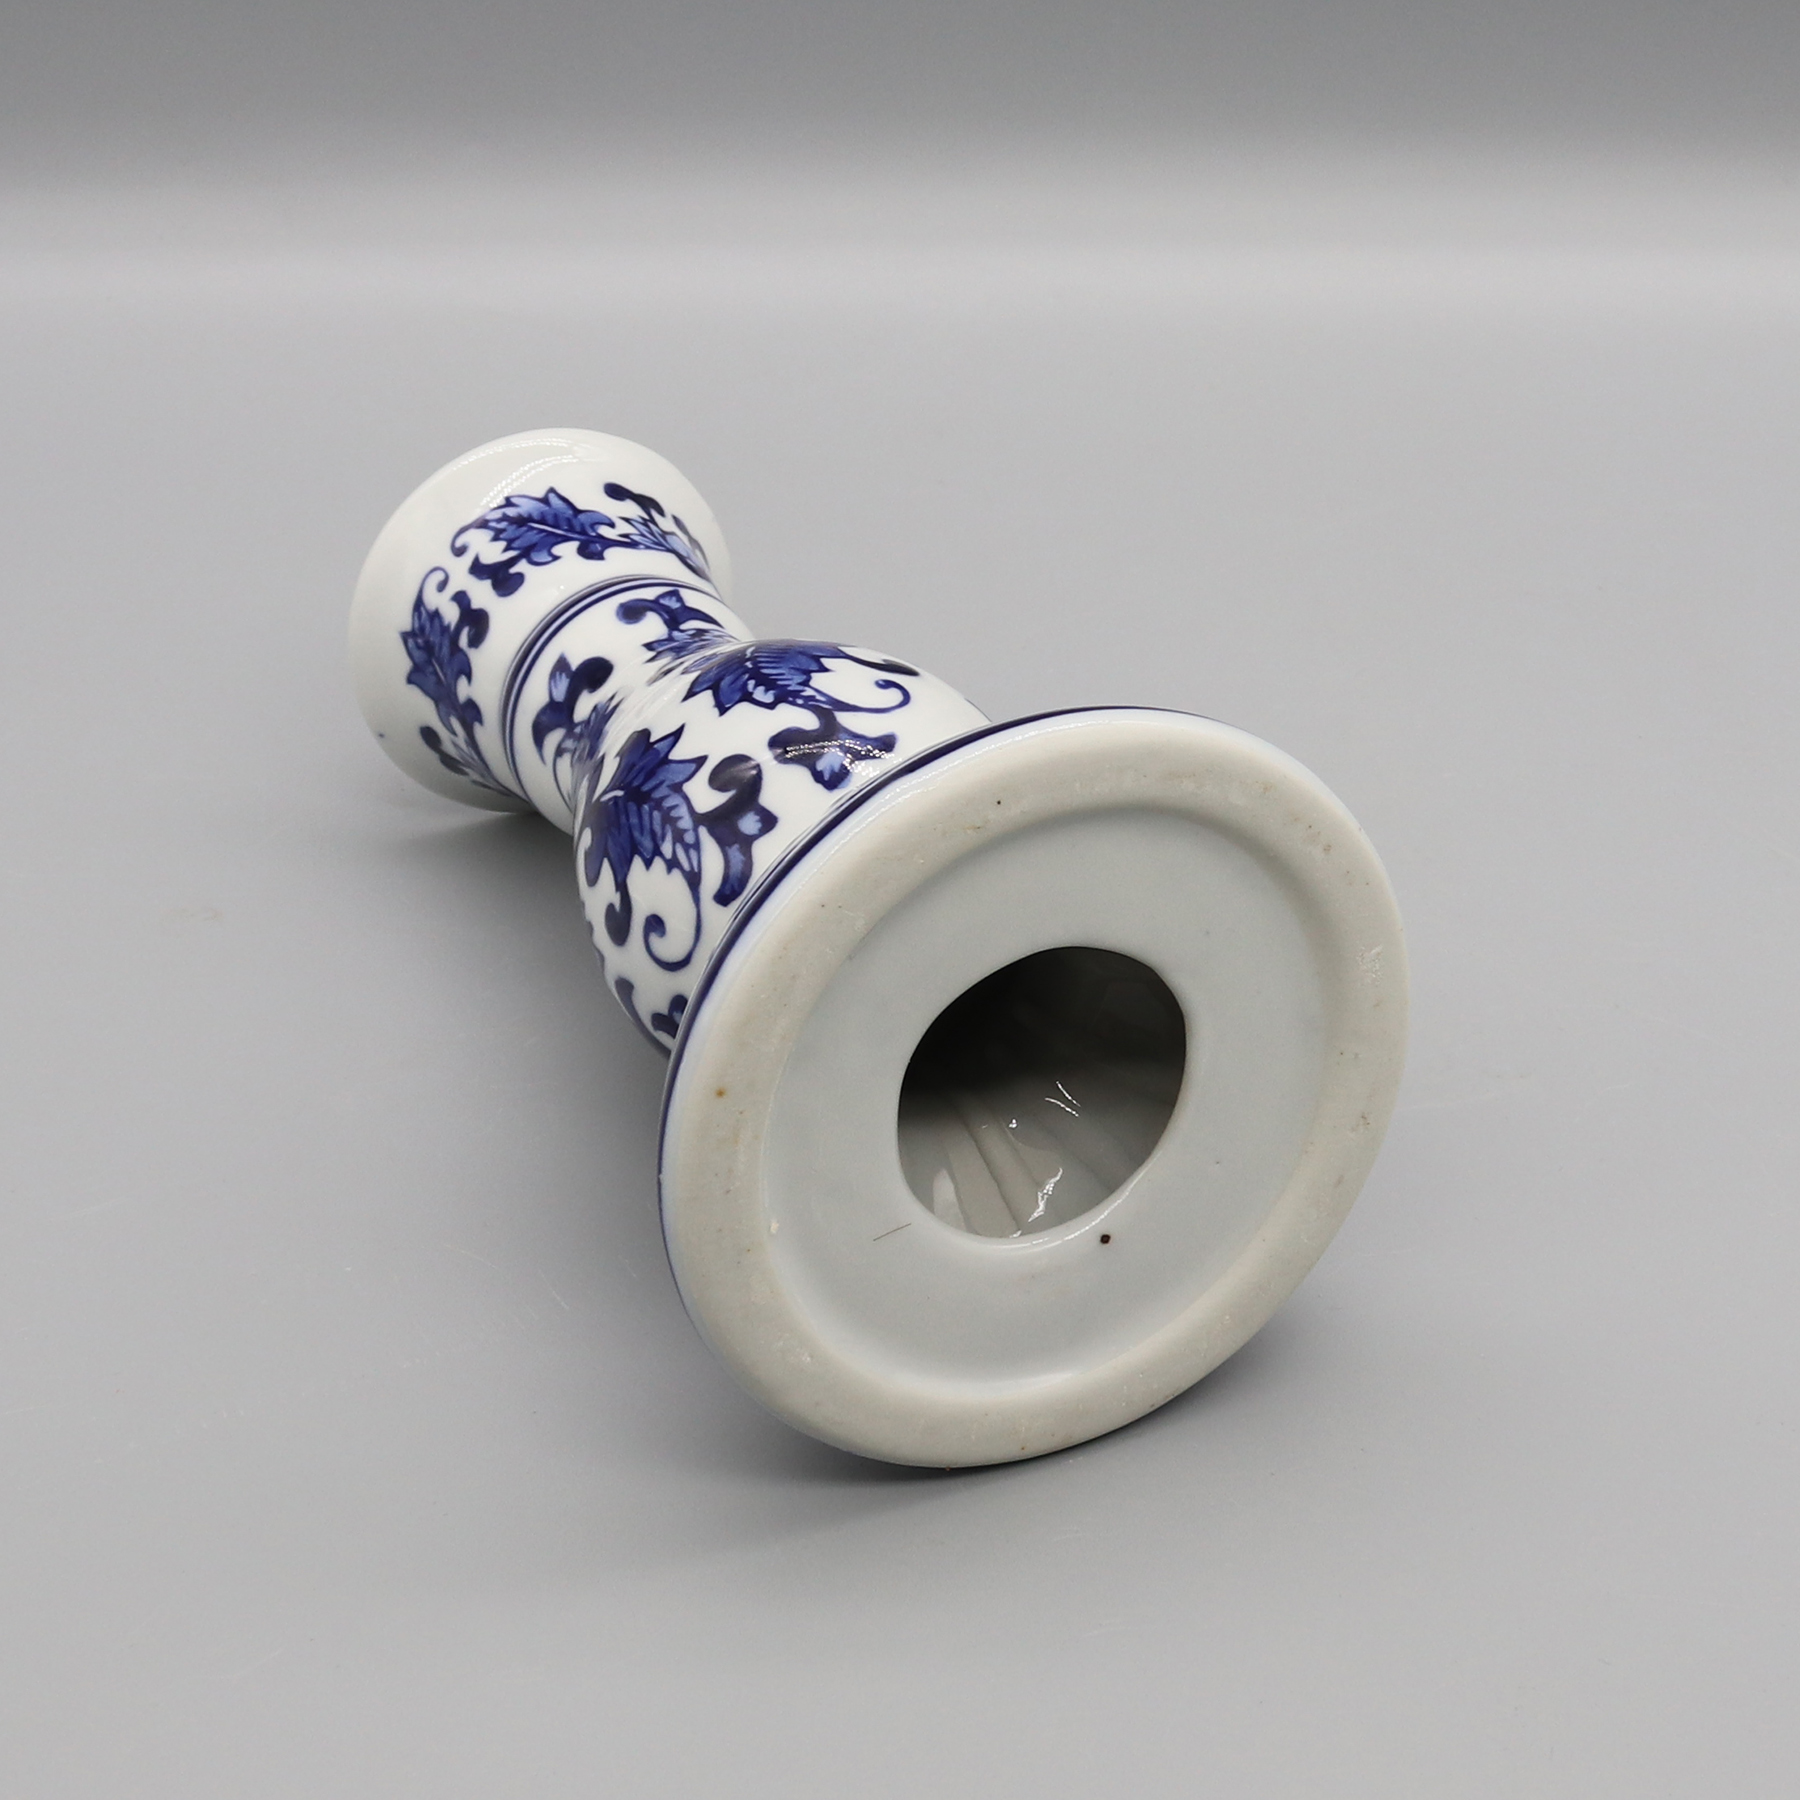 Ceramic Candle Holder, Blue and White Ceramics, Table Accessory